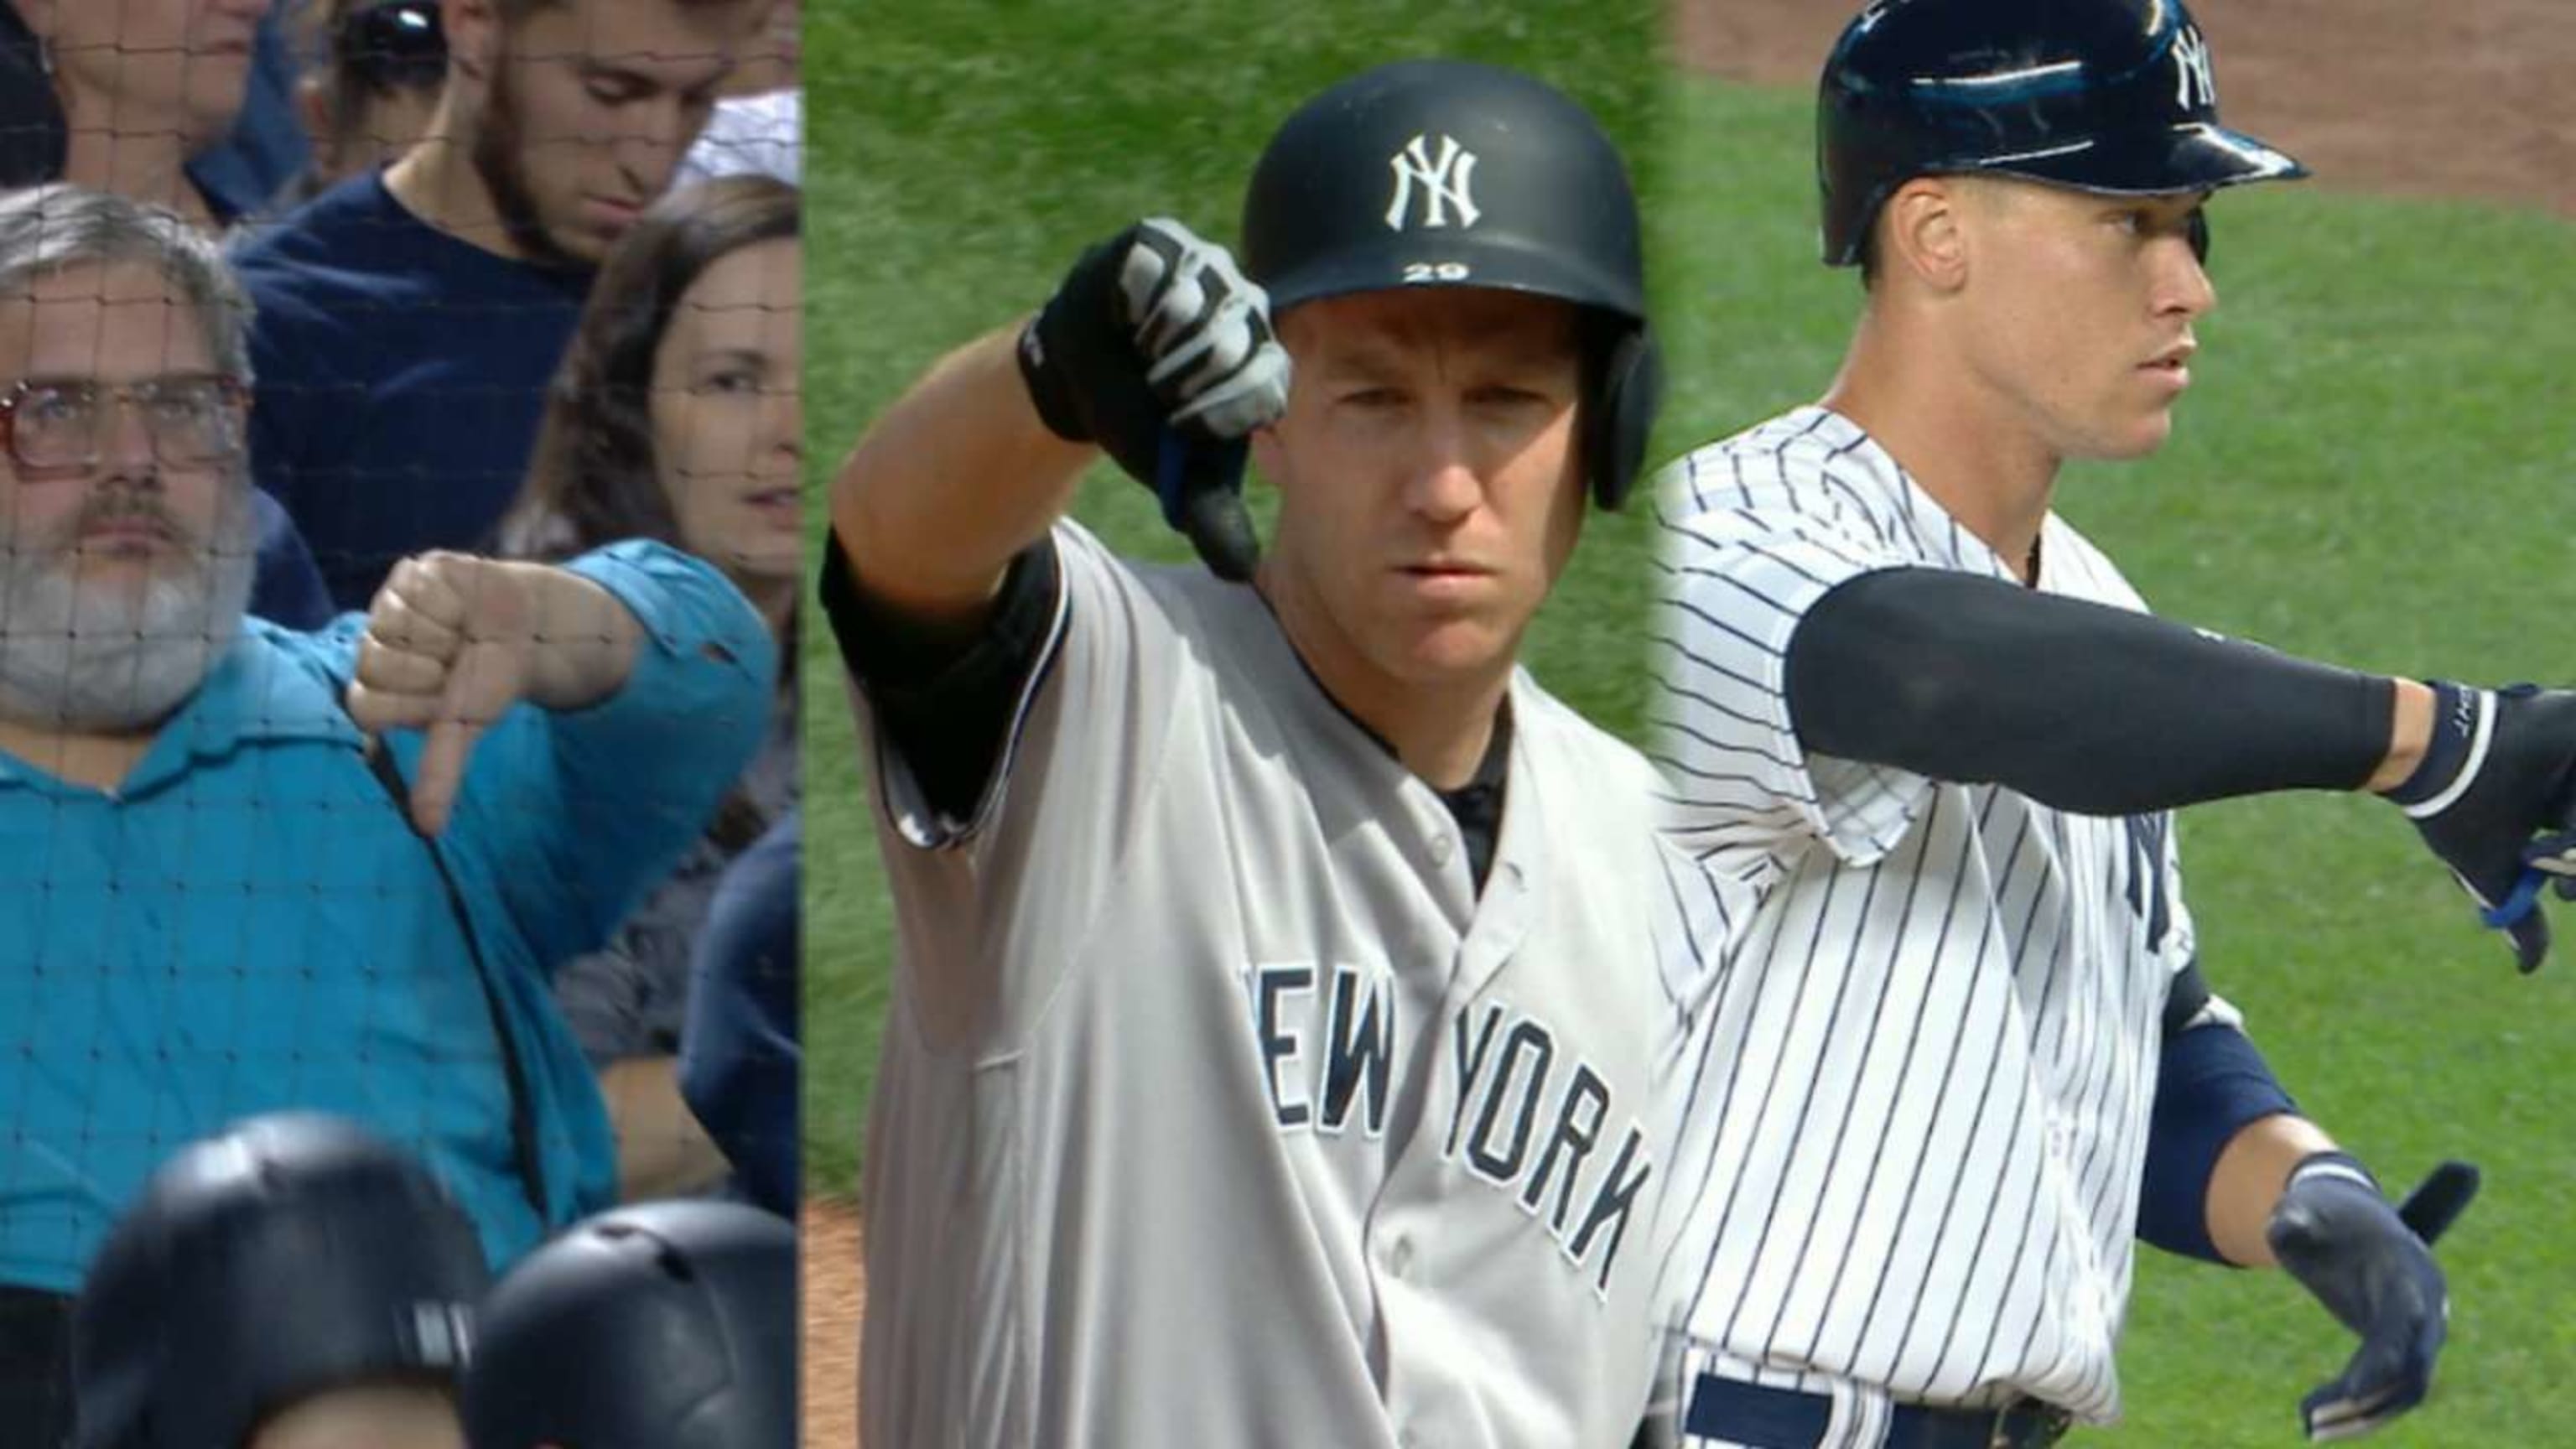 Who's better now, Yankees or Mets?